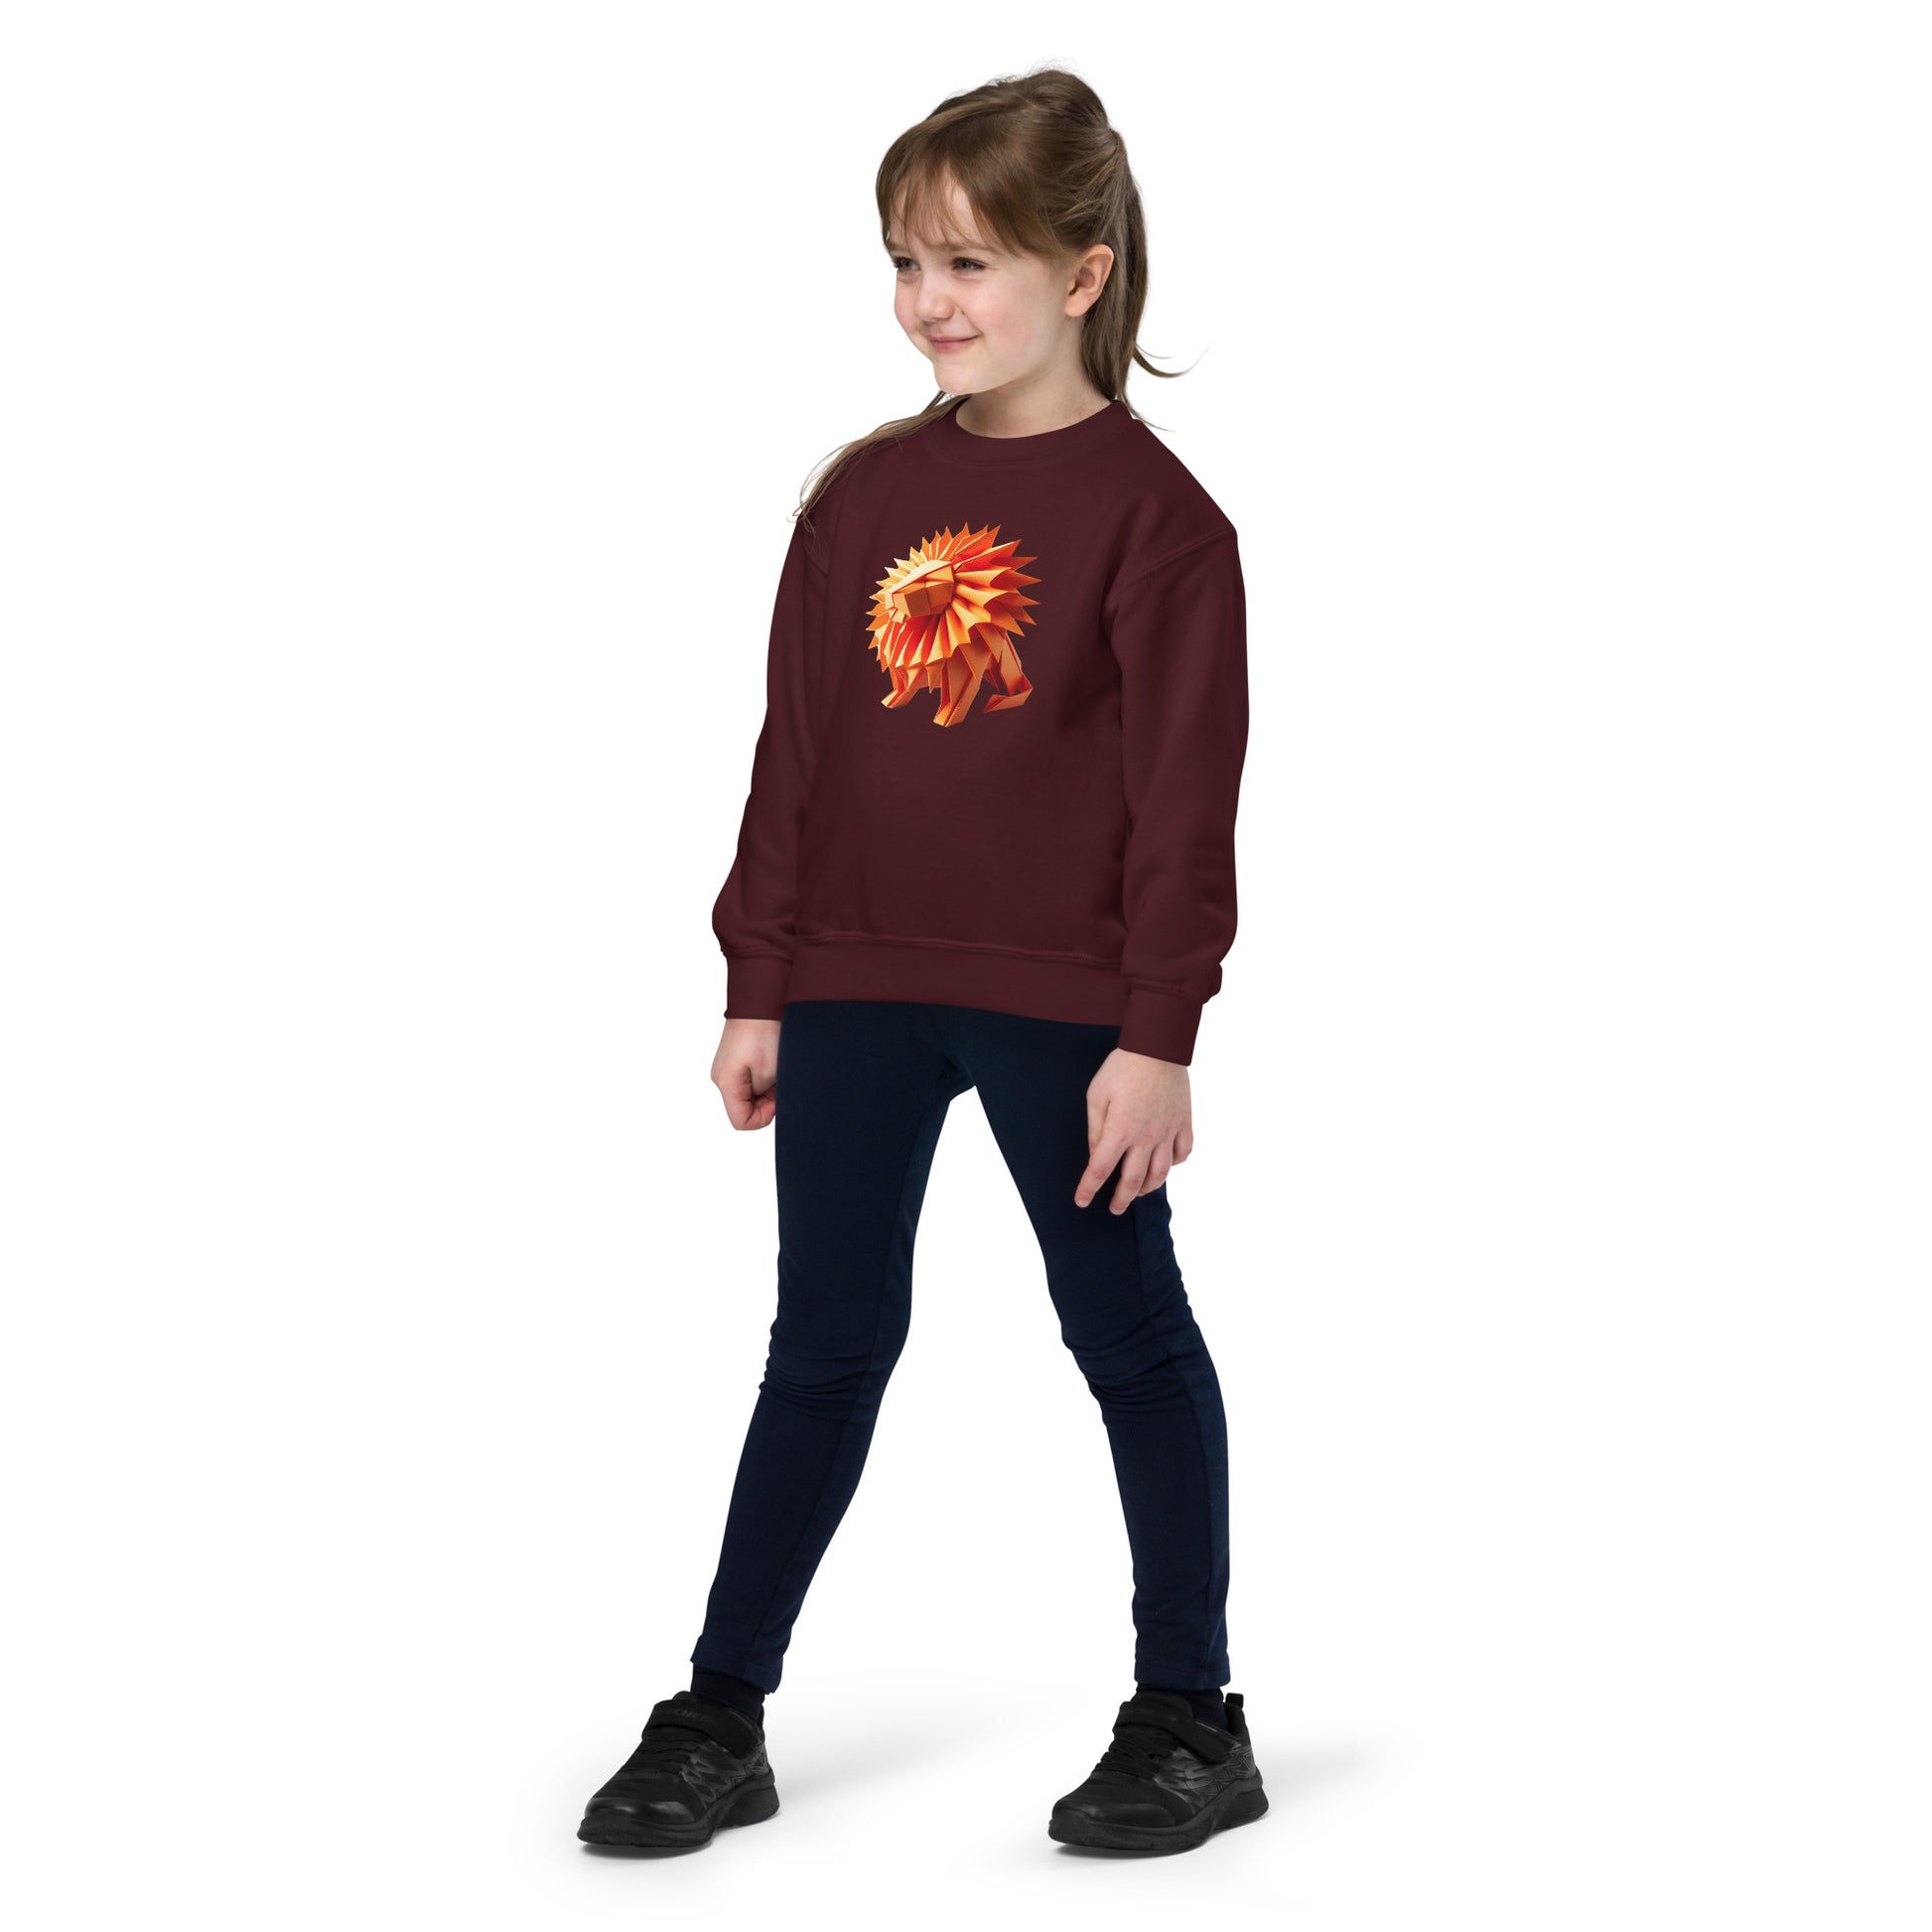 Youth with maroon sweater with print of a lion